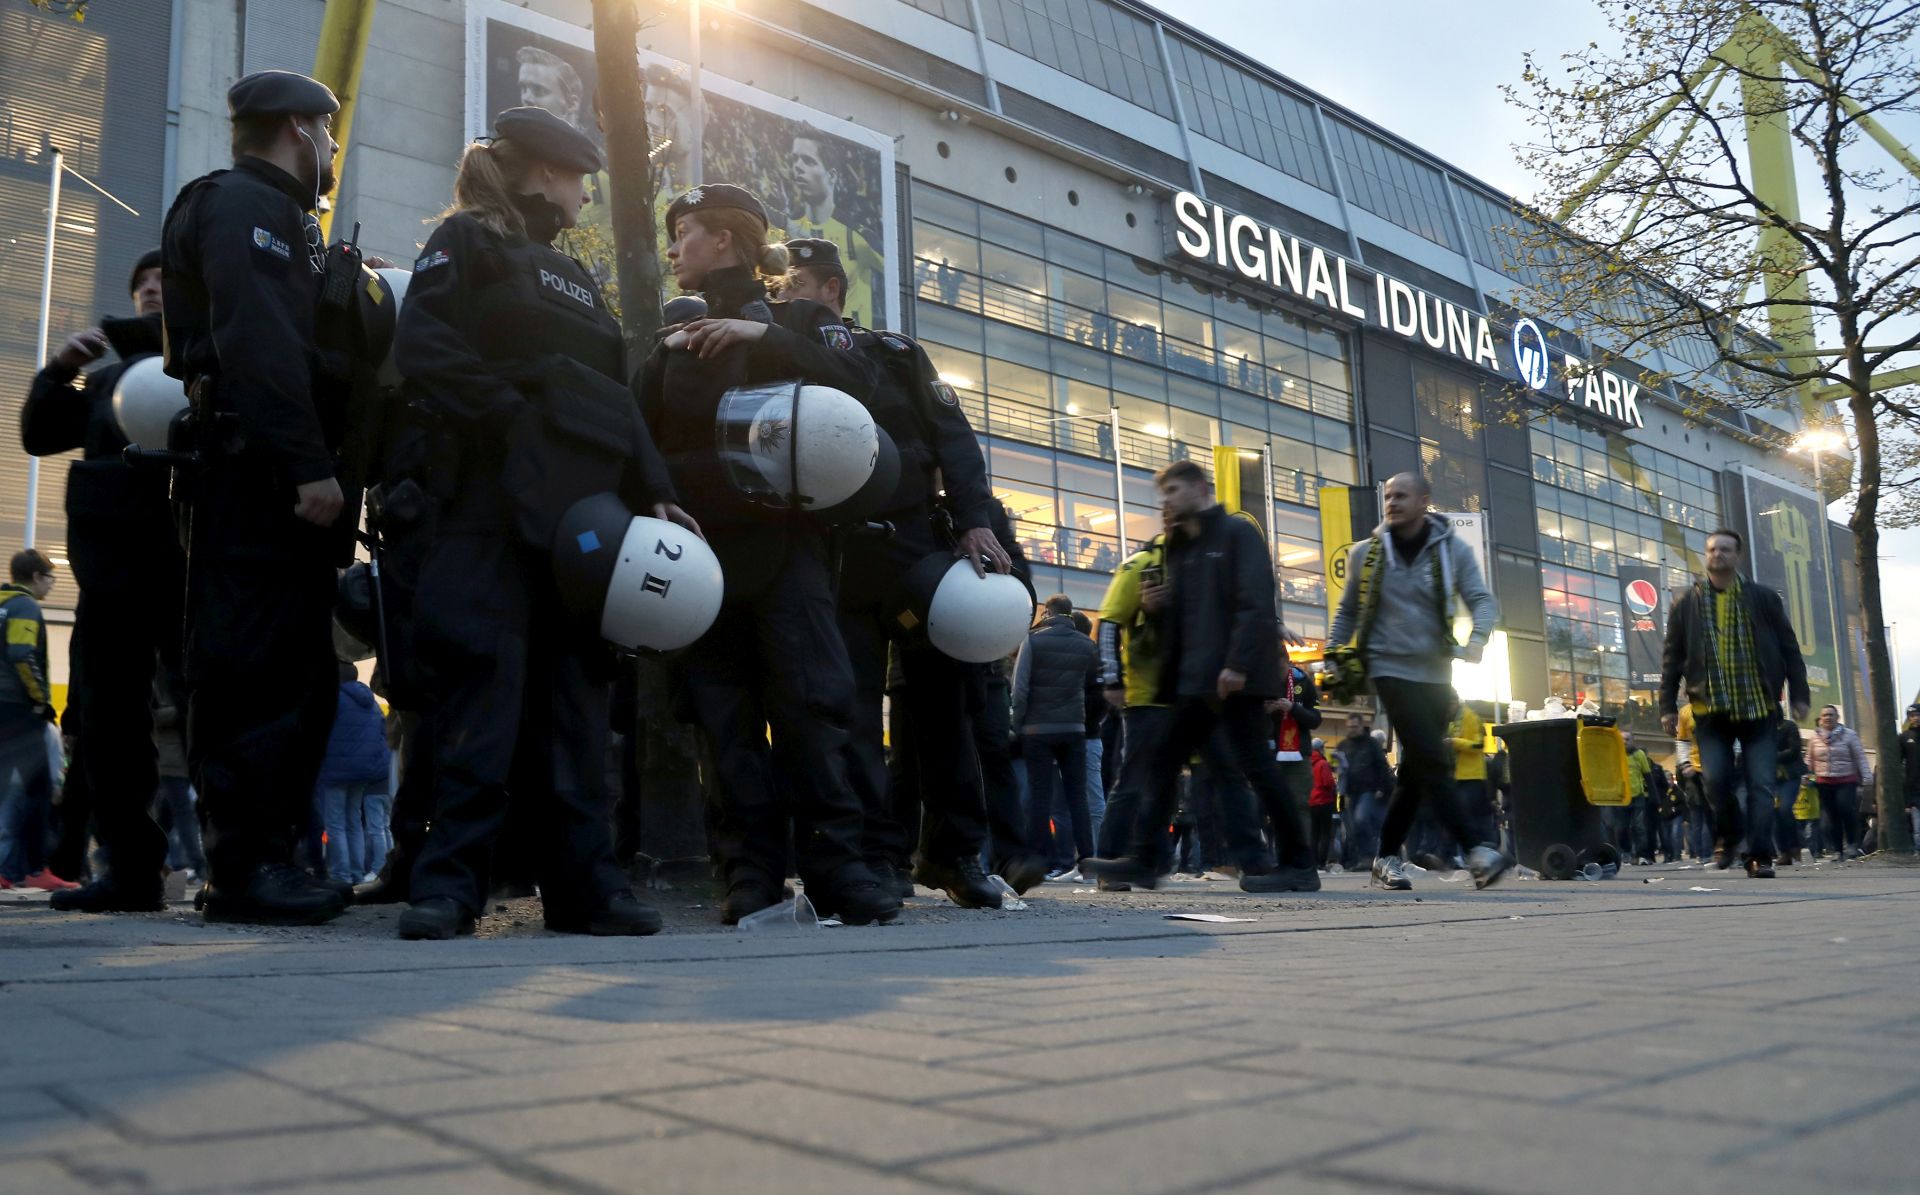 epa05903429 Police patrol arround the stadium in Dortmund, Germany, 11 April 2017. According to reports, Borussia Dortmund's team bus was damaged by three explosions on 11 April, as it was on its way to the stadium ahead of the UEFA Champions League soccer match between Borussia Dortmund and AS Monaco. Borussia Dortmund's player Marc Bartra was injured and is hospitalized. The match has been postponed.  EPA/FRIEDEMANN VOGEL